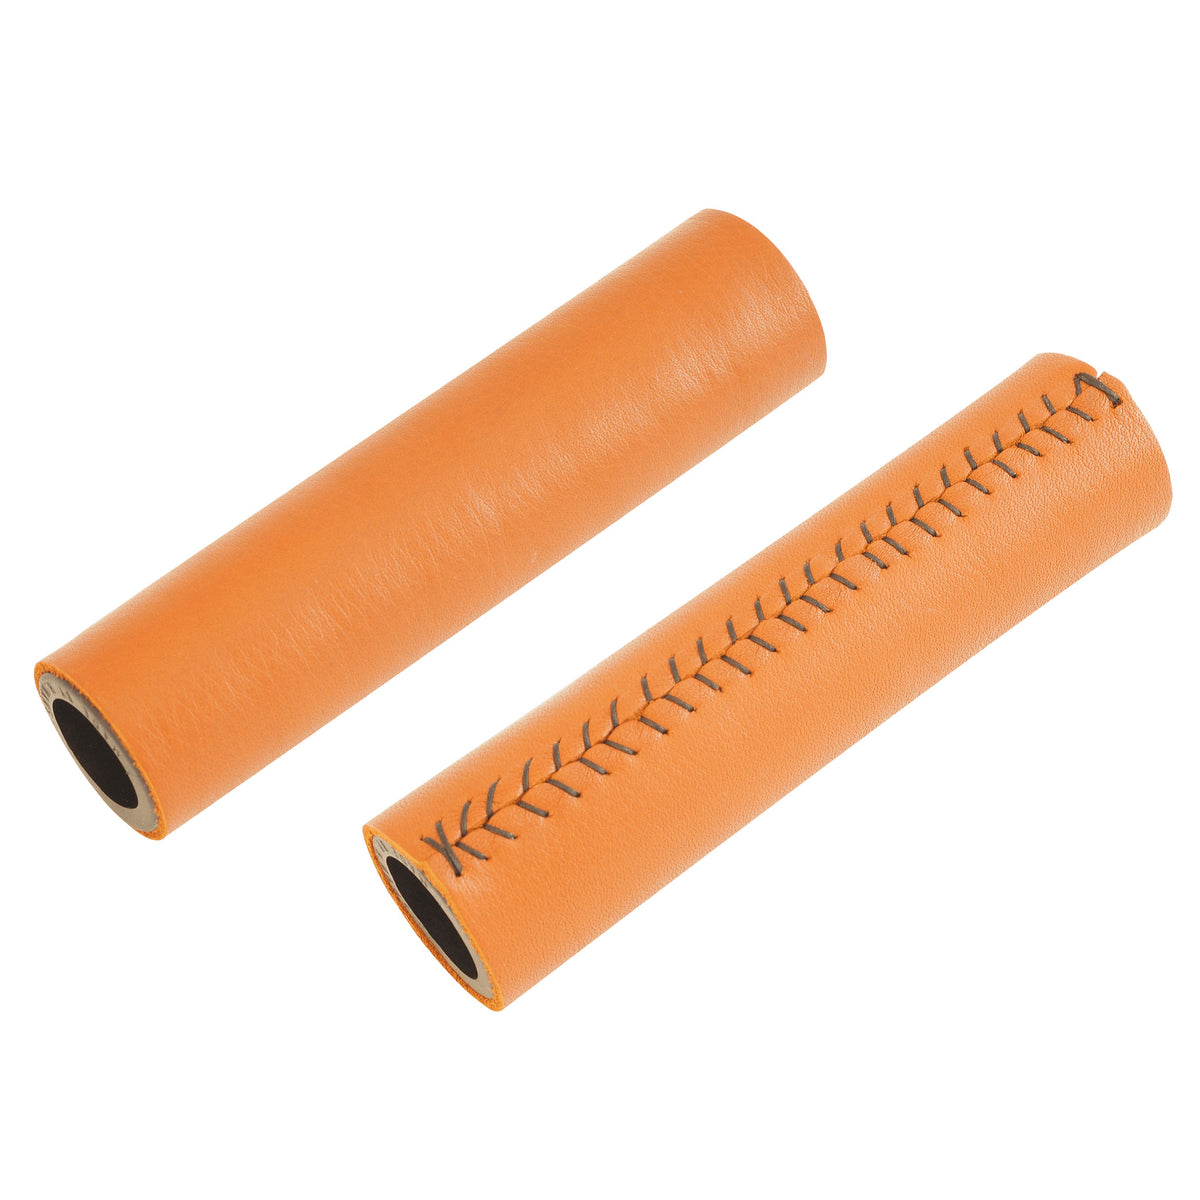 Traditional Leather Grips